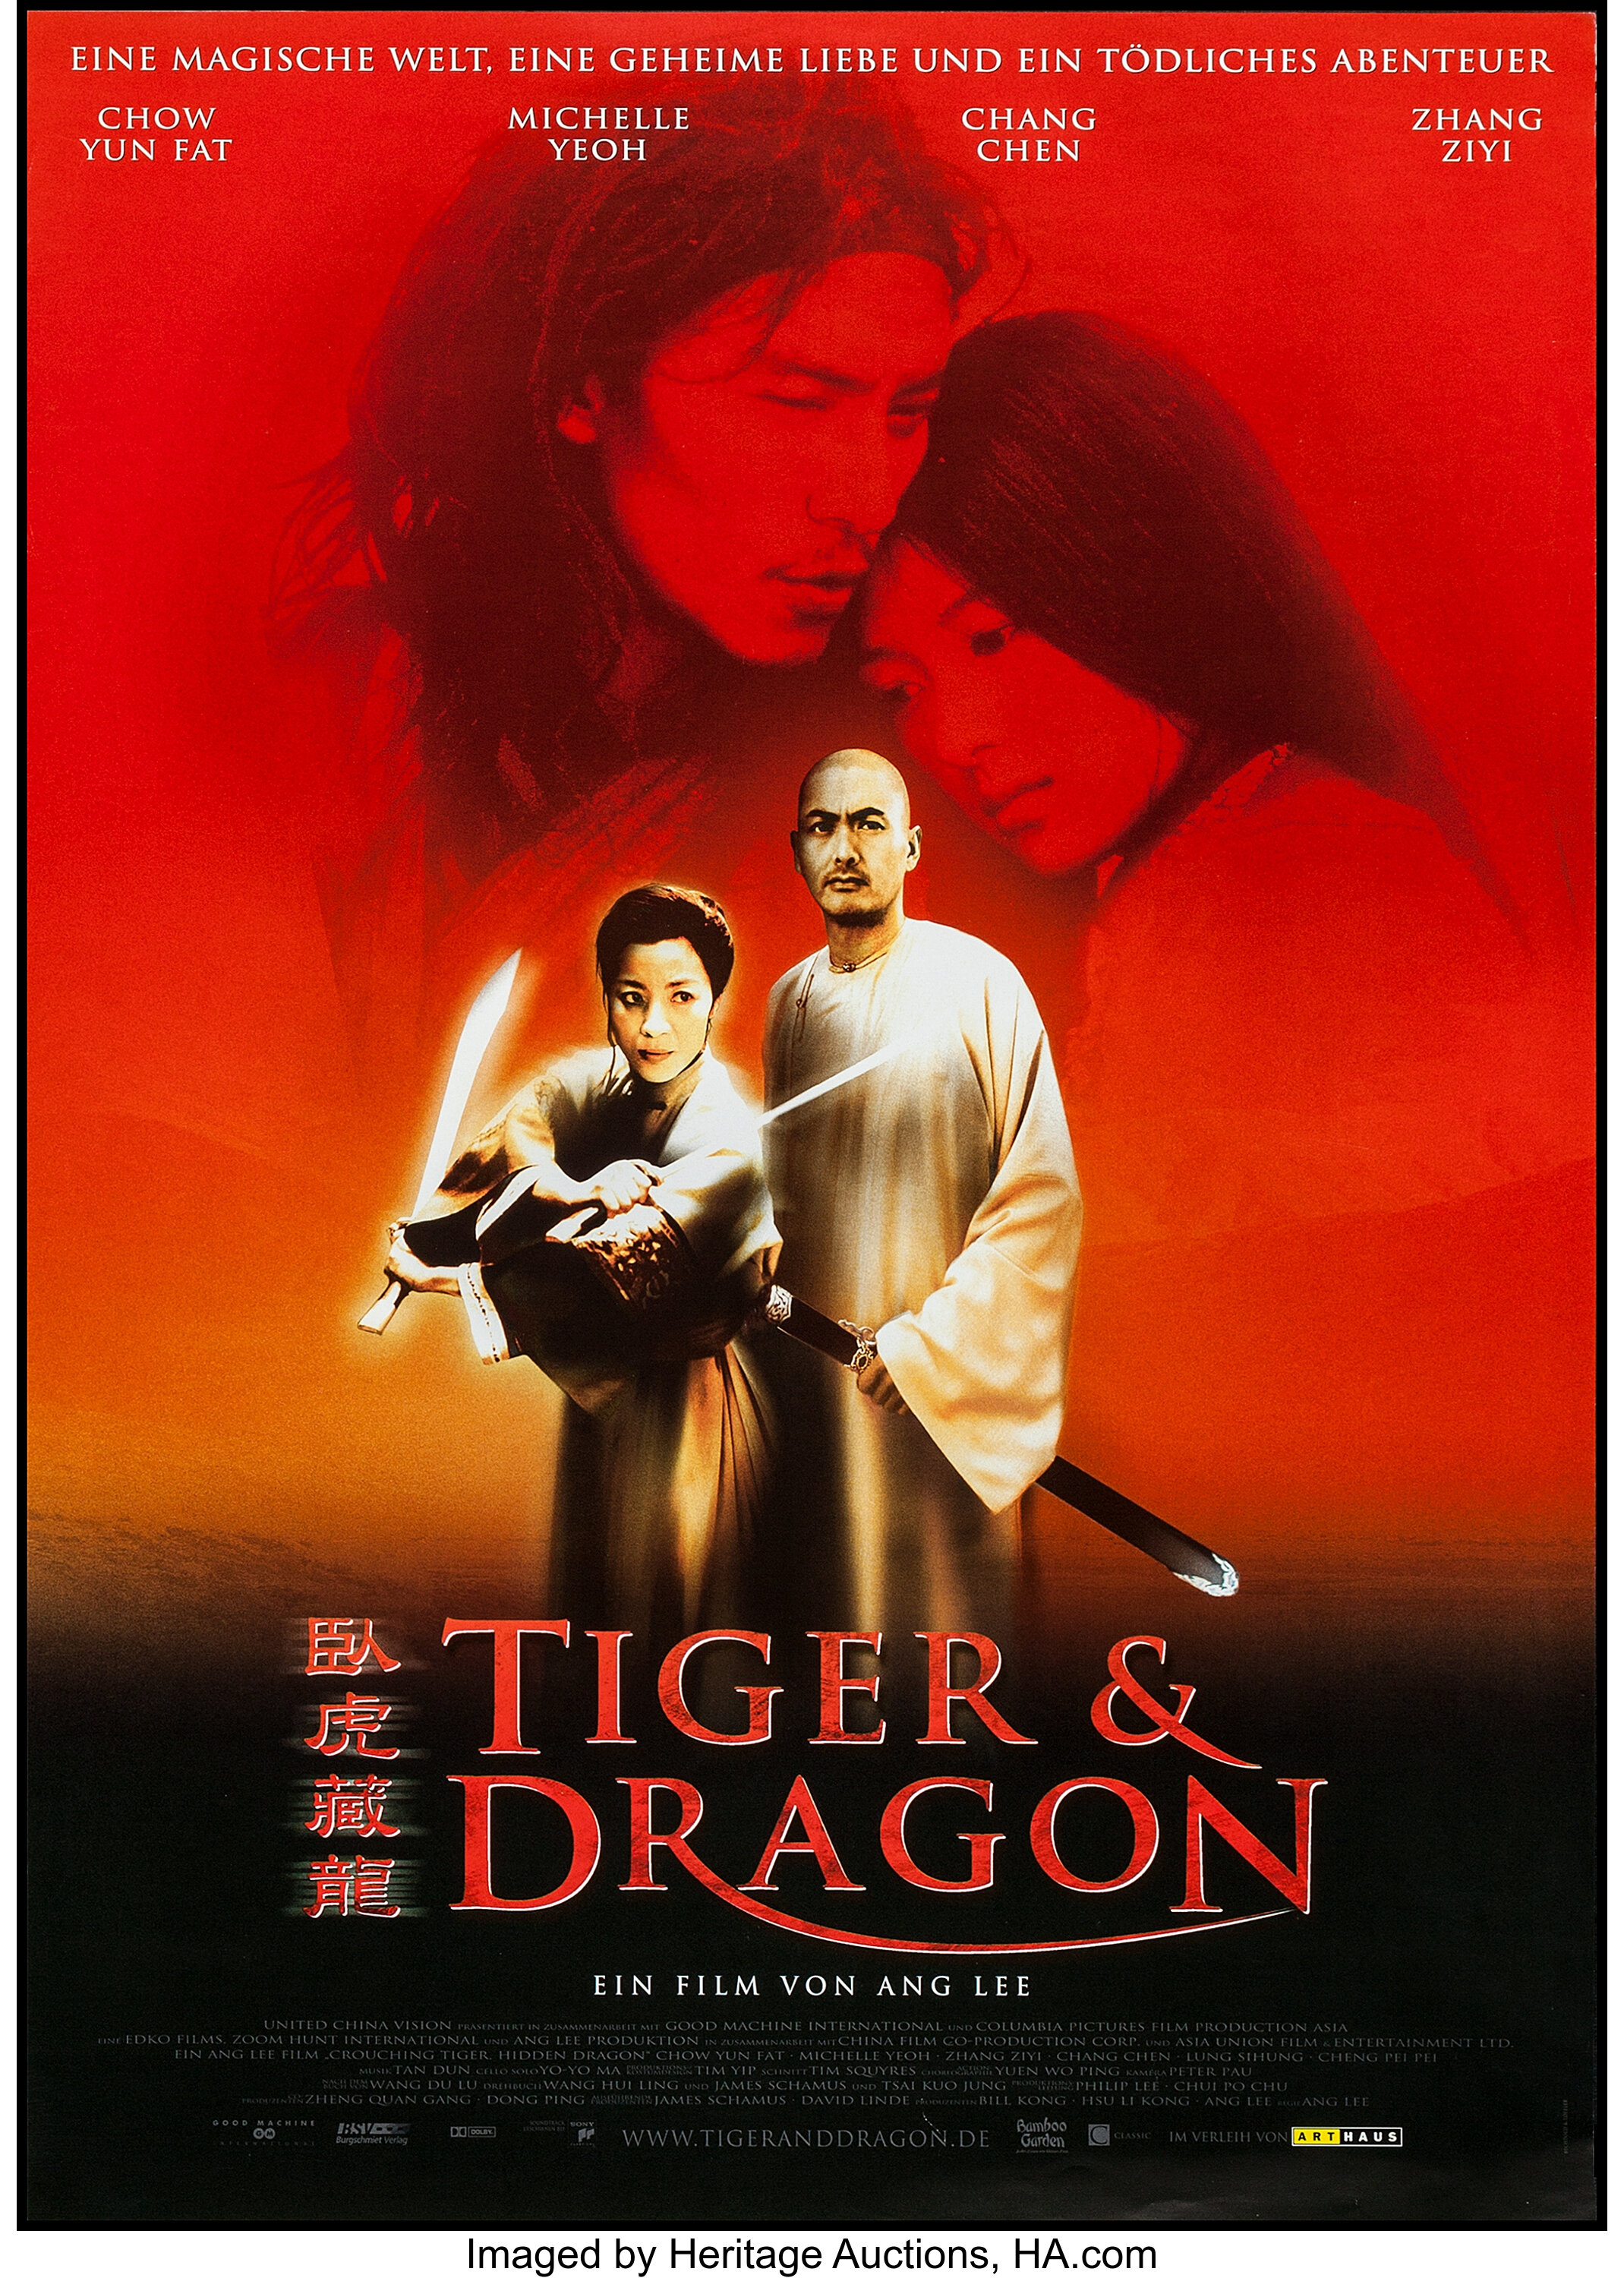 Crouching Tiger, Hidden Dragon': A masterpiece returns to theaters - Los  Angeles Times